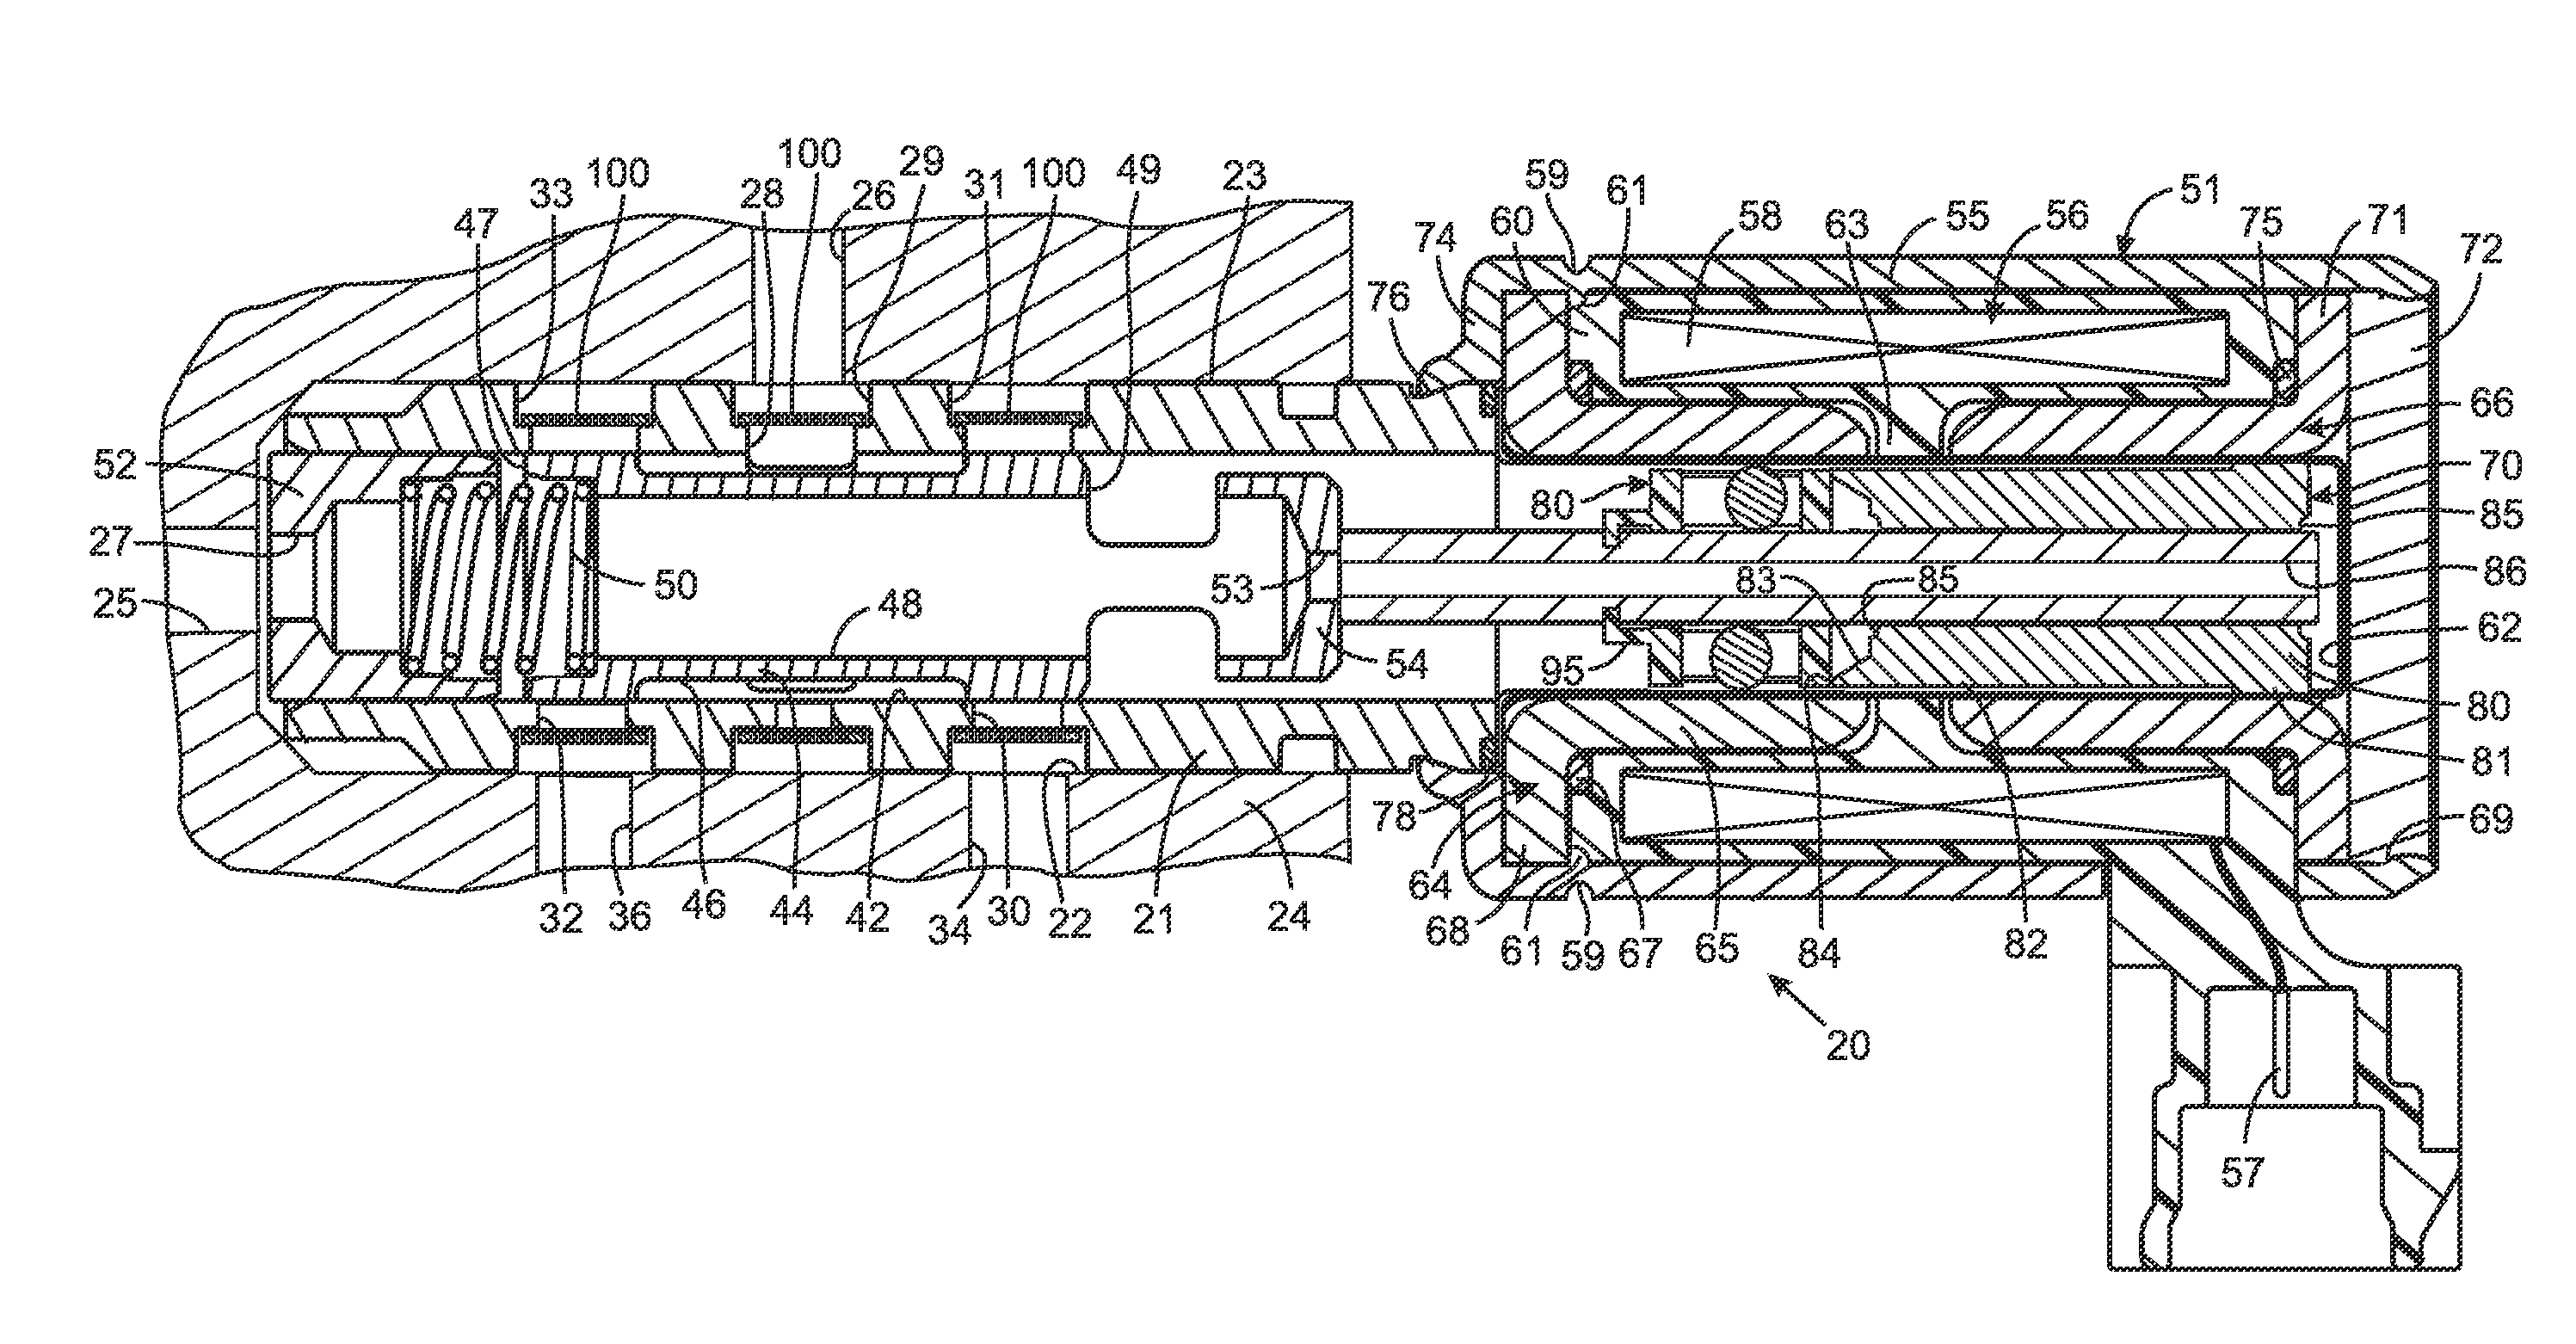 Electrohydraulic valve having a solenoid actuator plunger with an armature and a bearing